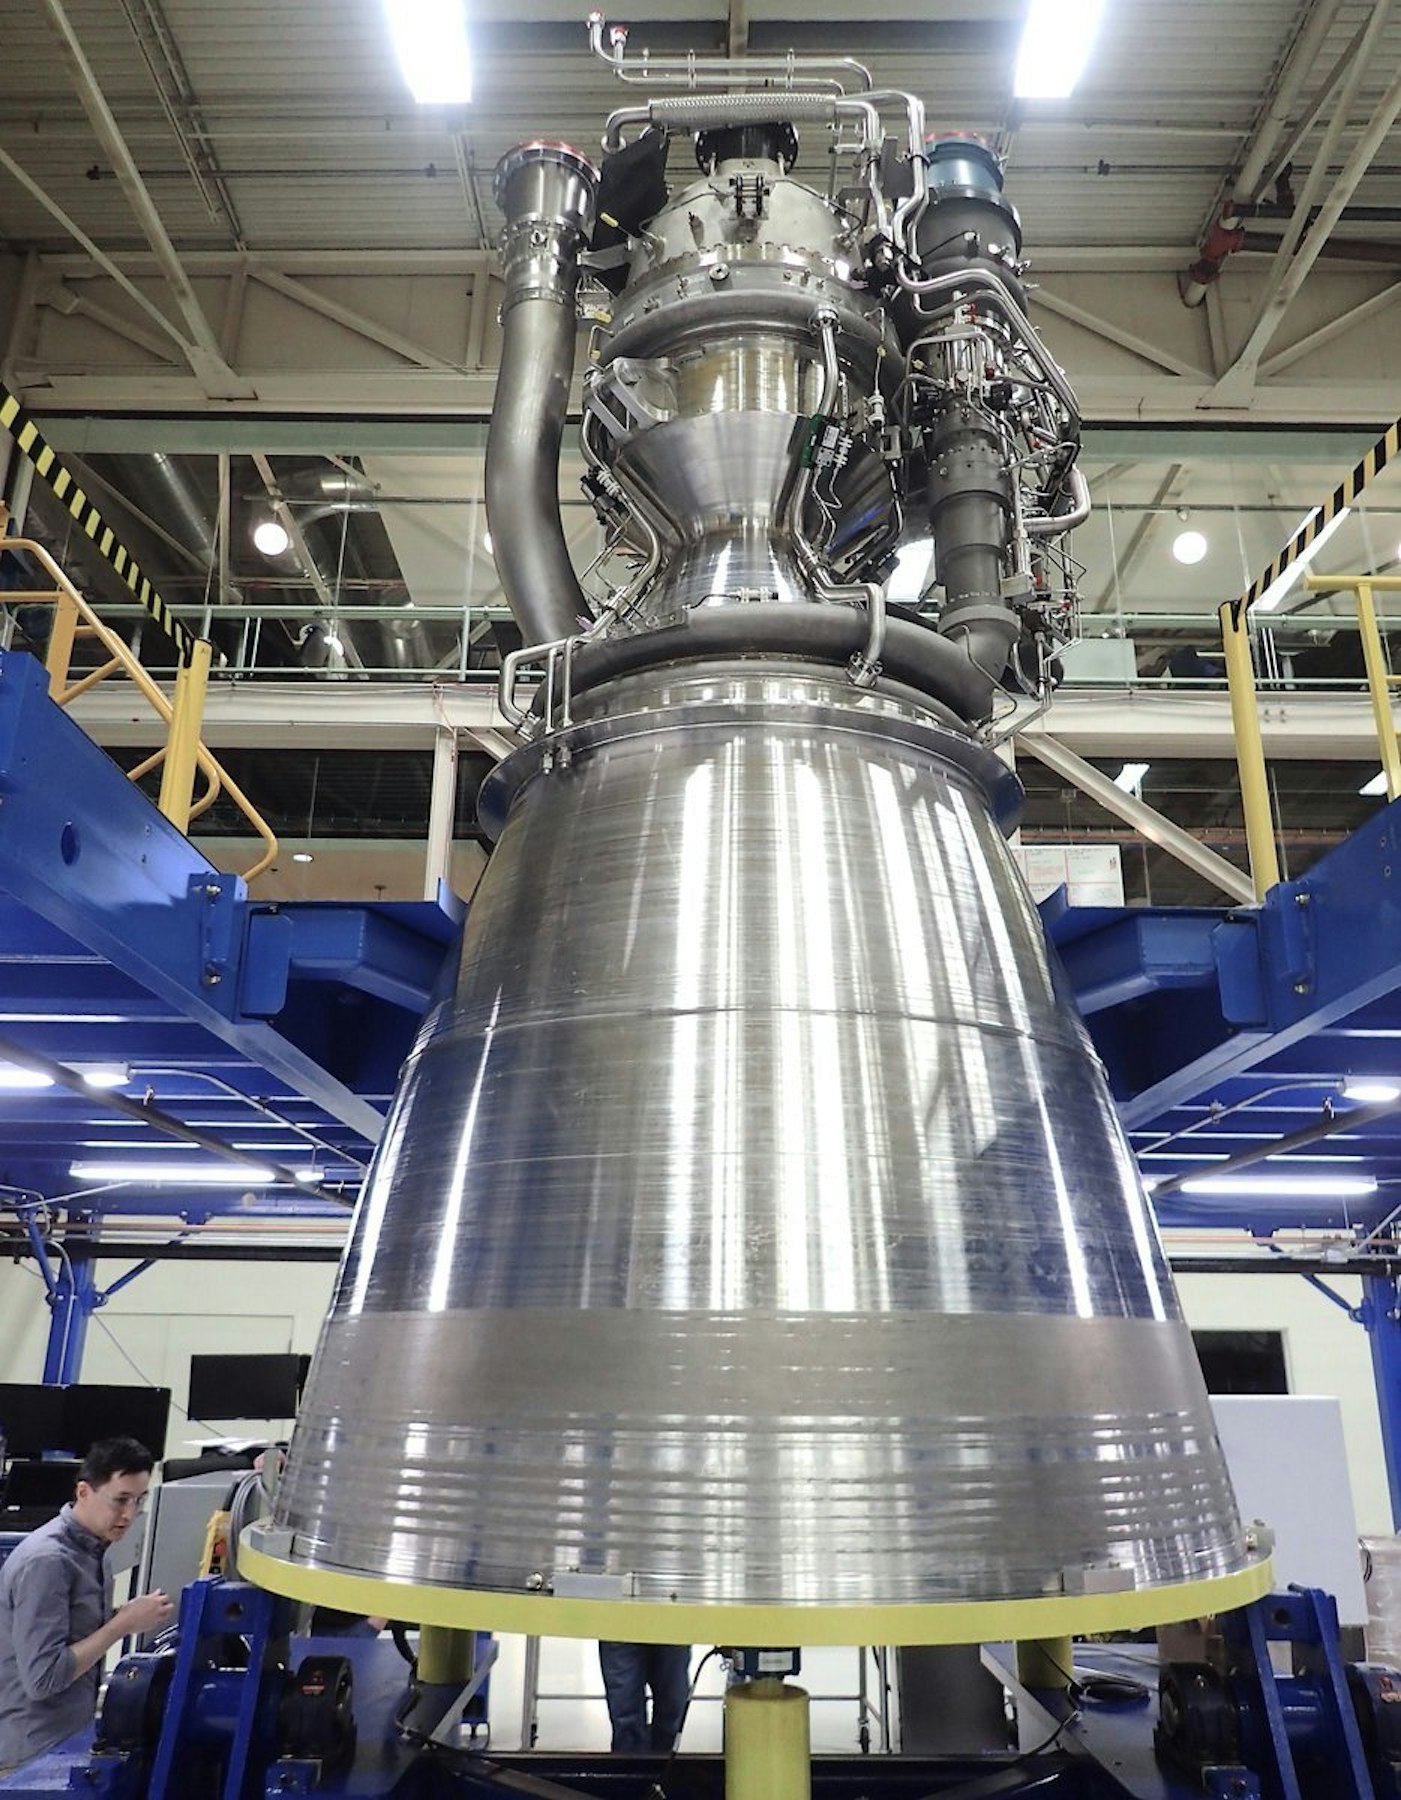 bezos-shared-this-photo-on-twitter-monday-with-the-caption-1st-be-4-engine-fully-assembled-2nd-a.jpeg